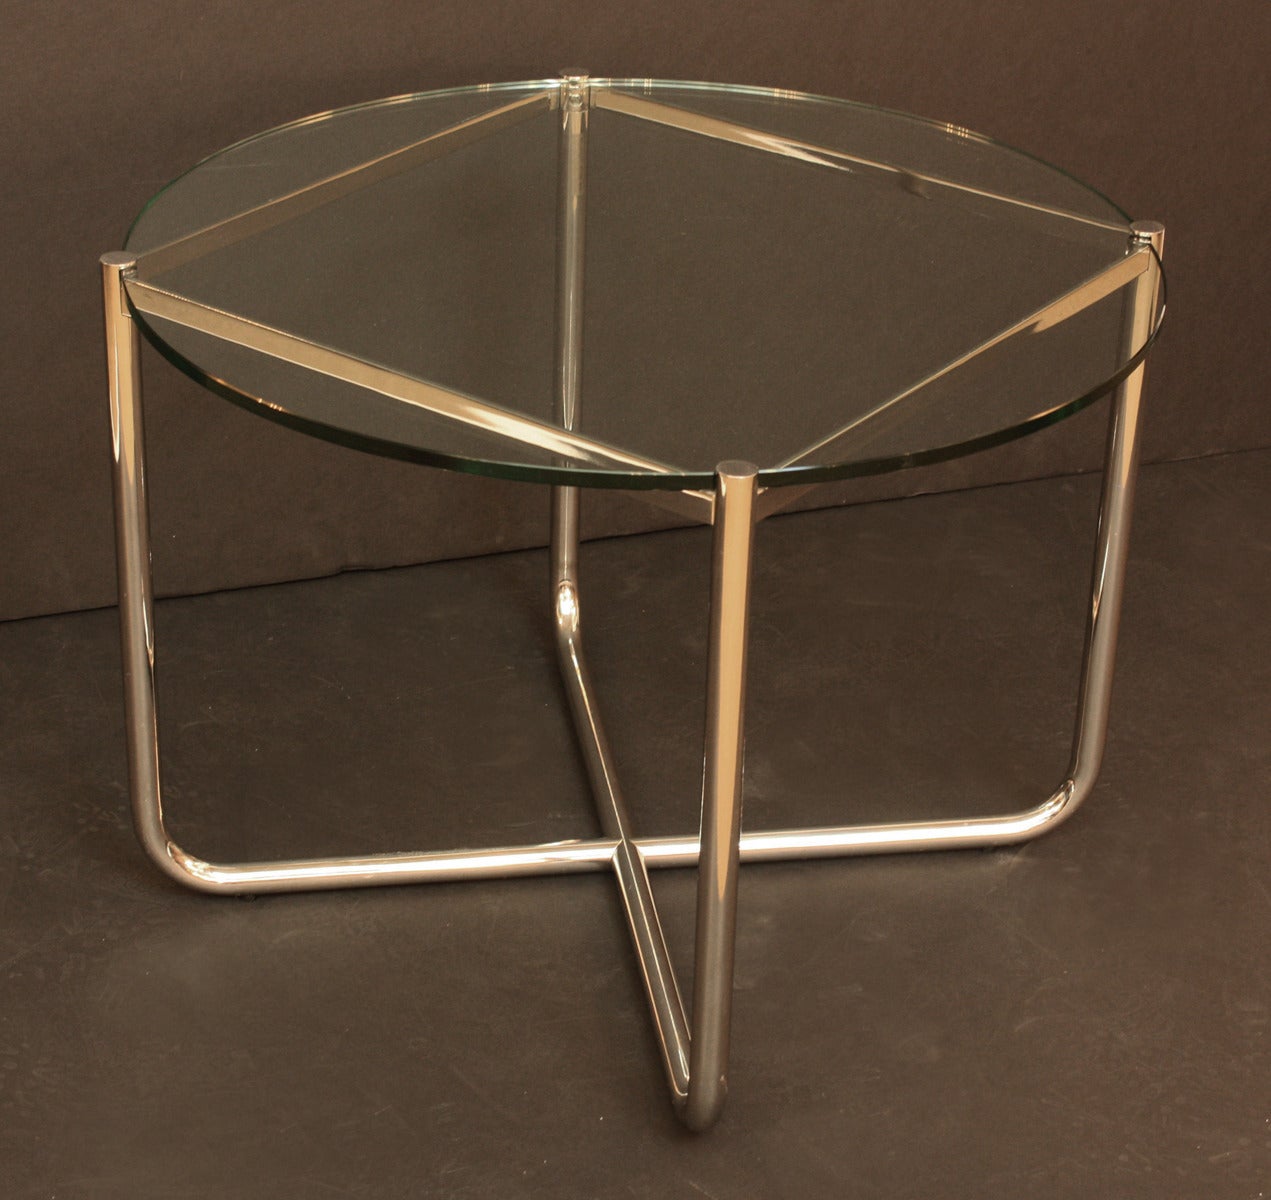 Bauhaus Mies van der Rohe's MR Side Table by Knoll